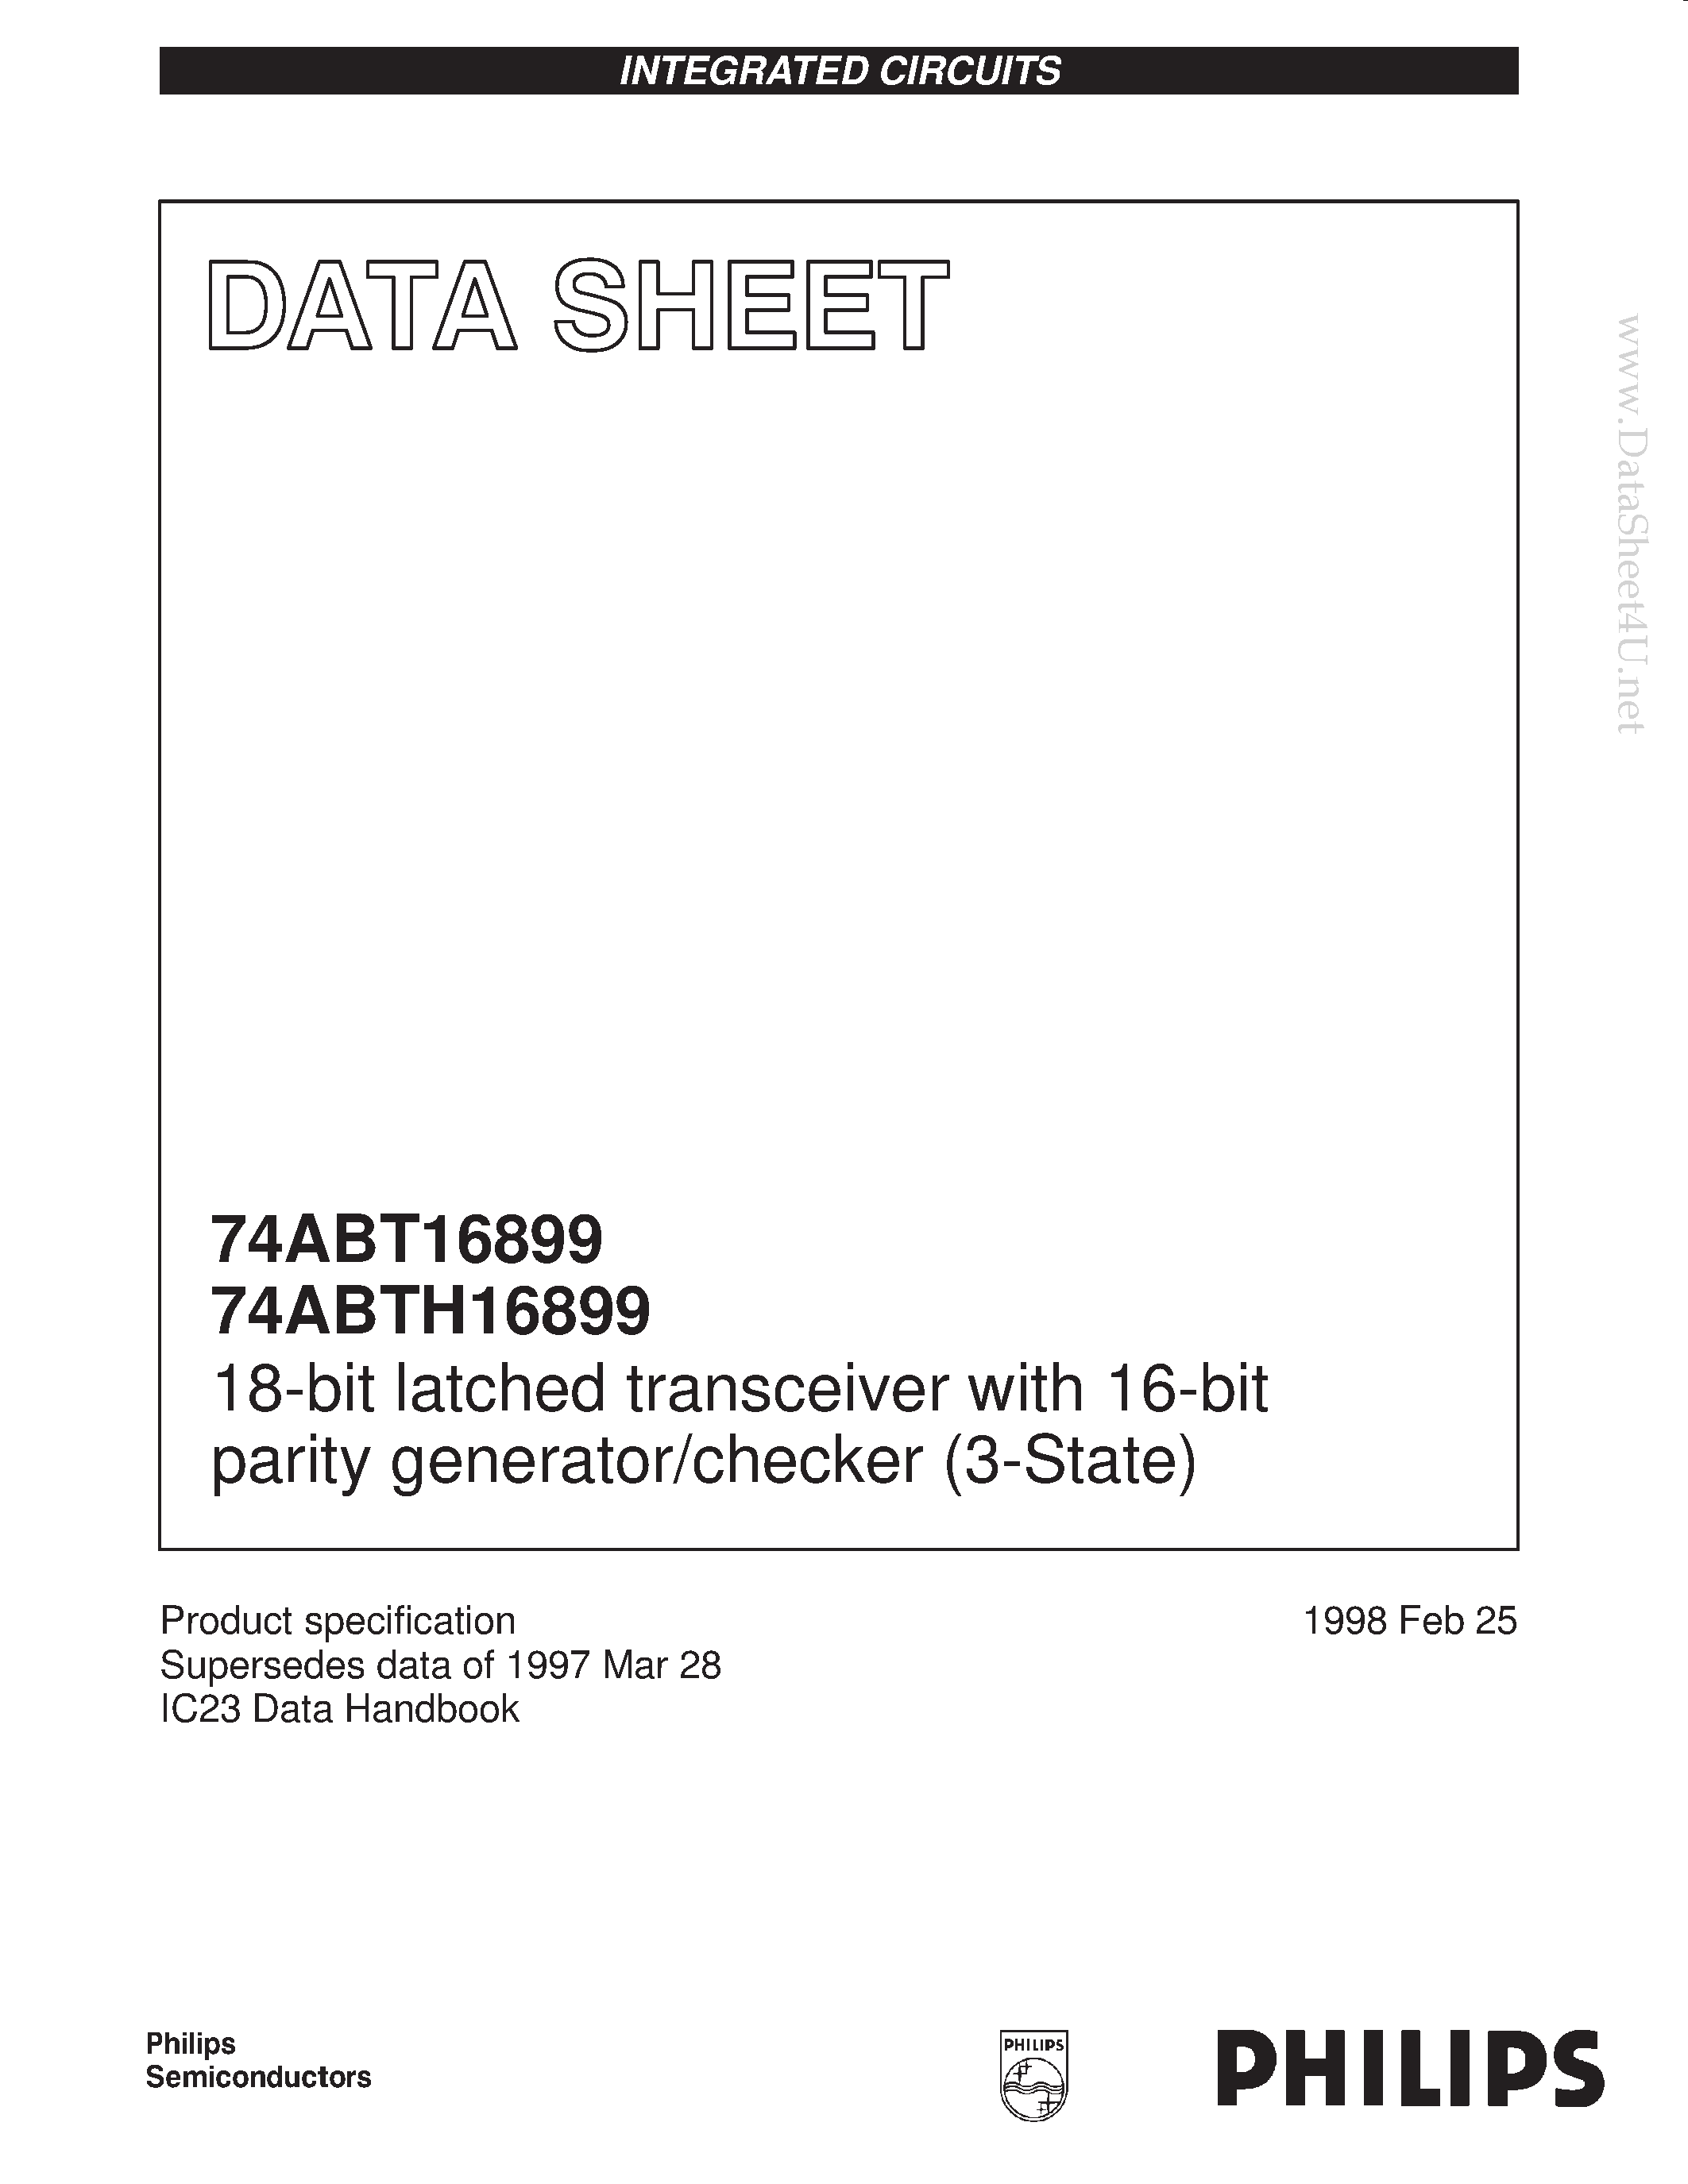 Даташит 74ABTH16899 - 18-bit latched transceiver with 16-bit parity generator/checker 3-State страница 1